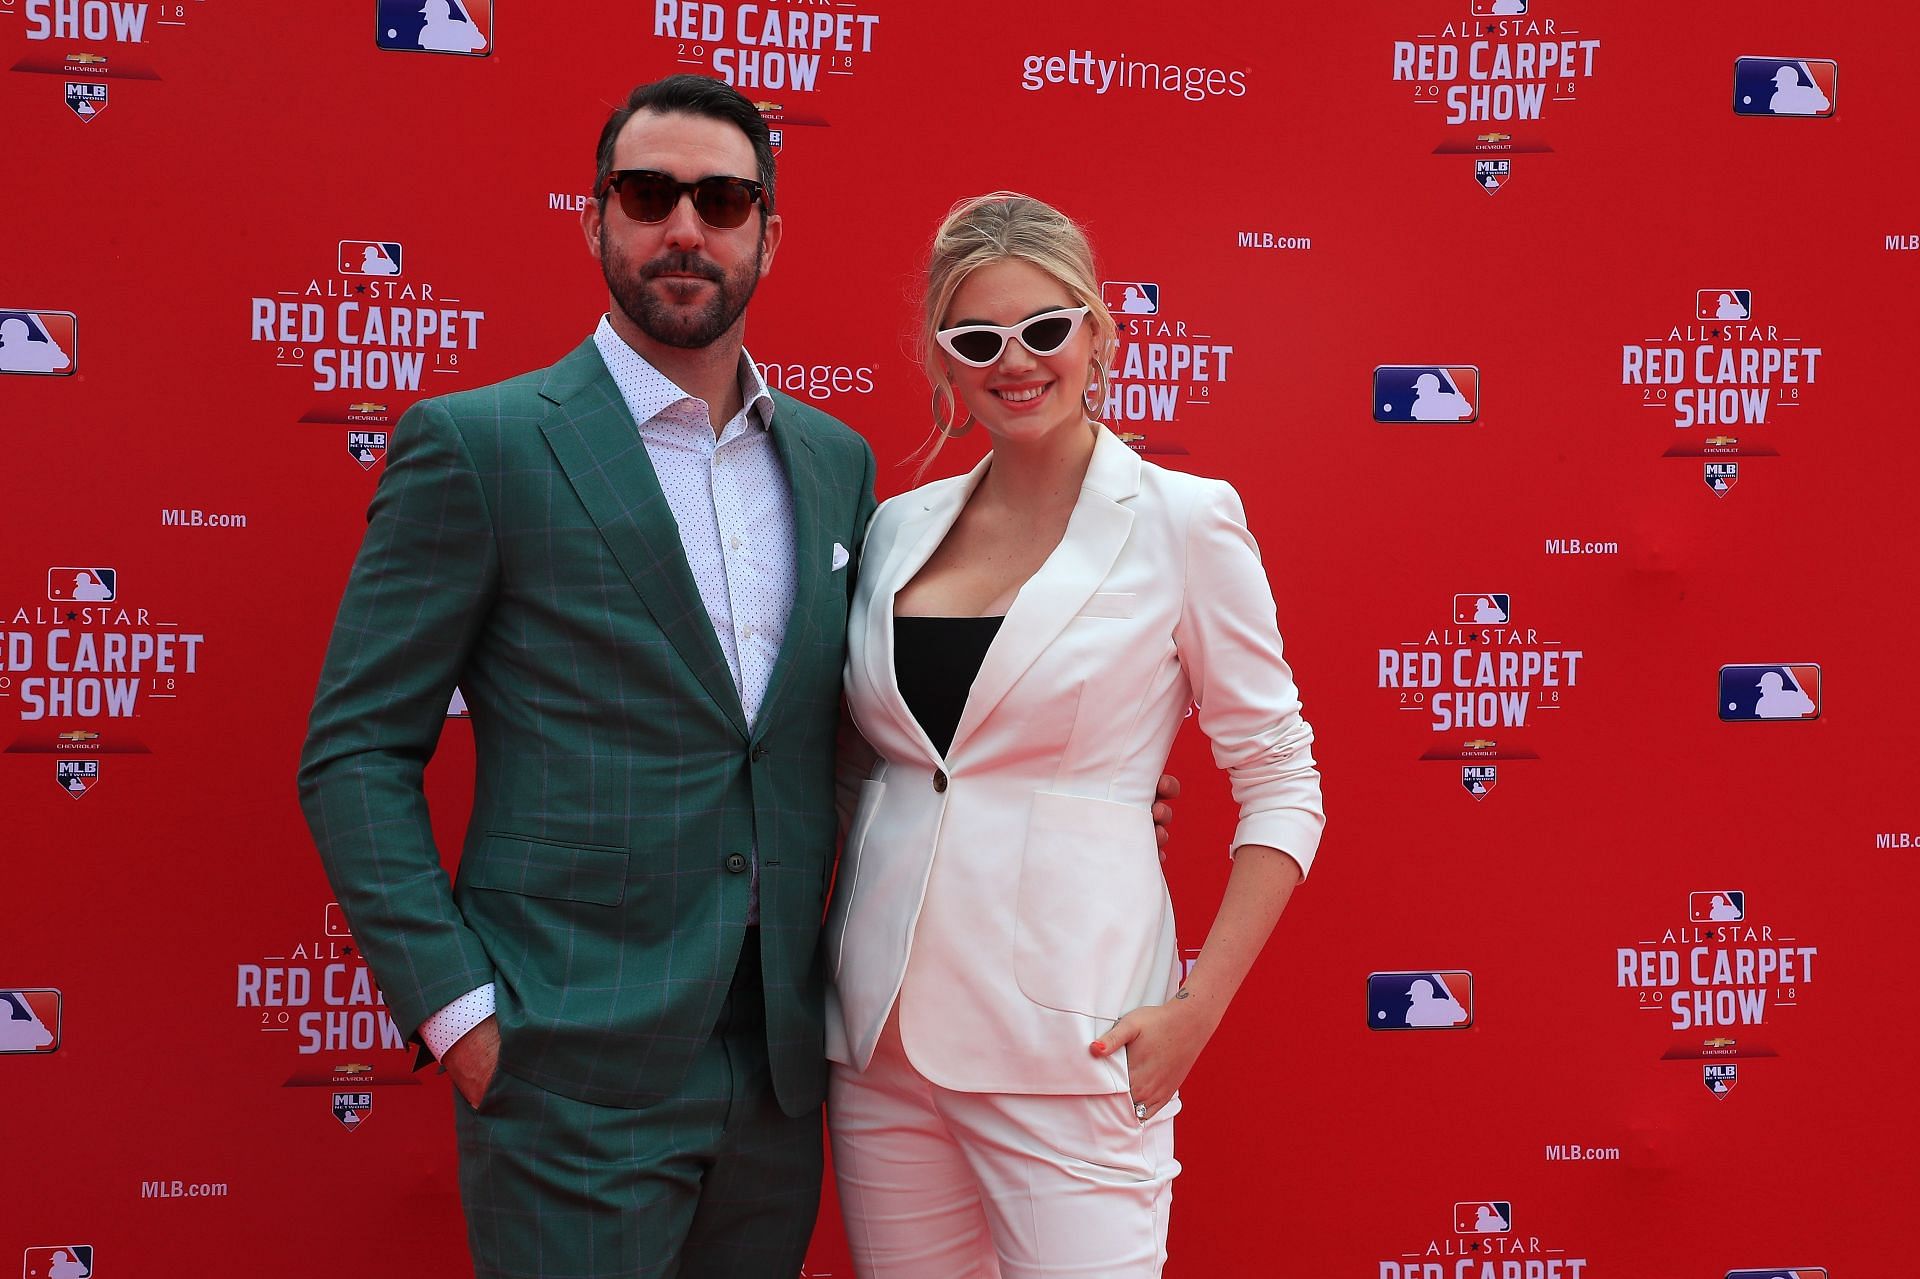 89th MLB All-Star Game, presented by MasterCard - Red Carpet: WASHINGTON, DC - JULY 17: Verlander #35 of the Houston Astros and the American League and wife Kate Upton attend the 89th MLB All-Star Game, presented by MasterCard red carpet at Nationals Park on July 17, 2018, in Washington, DC. (Photo by Mike Lawrie/Getty Images)